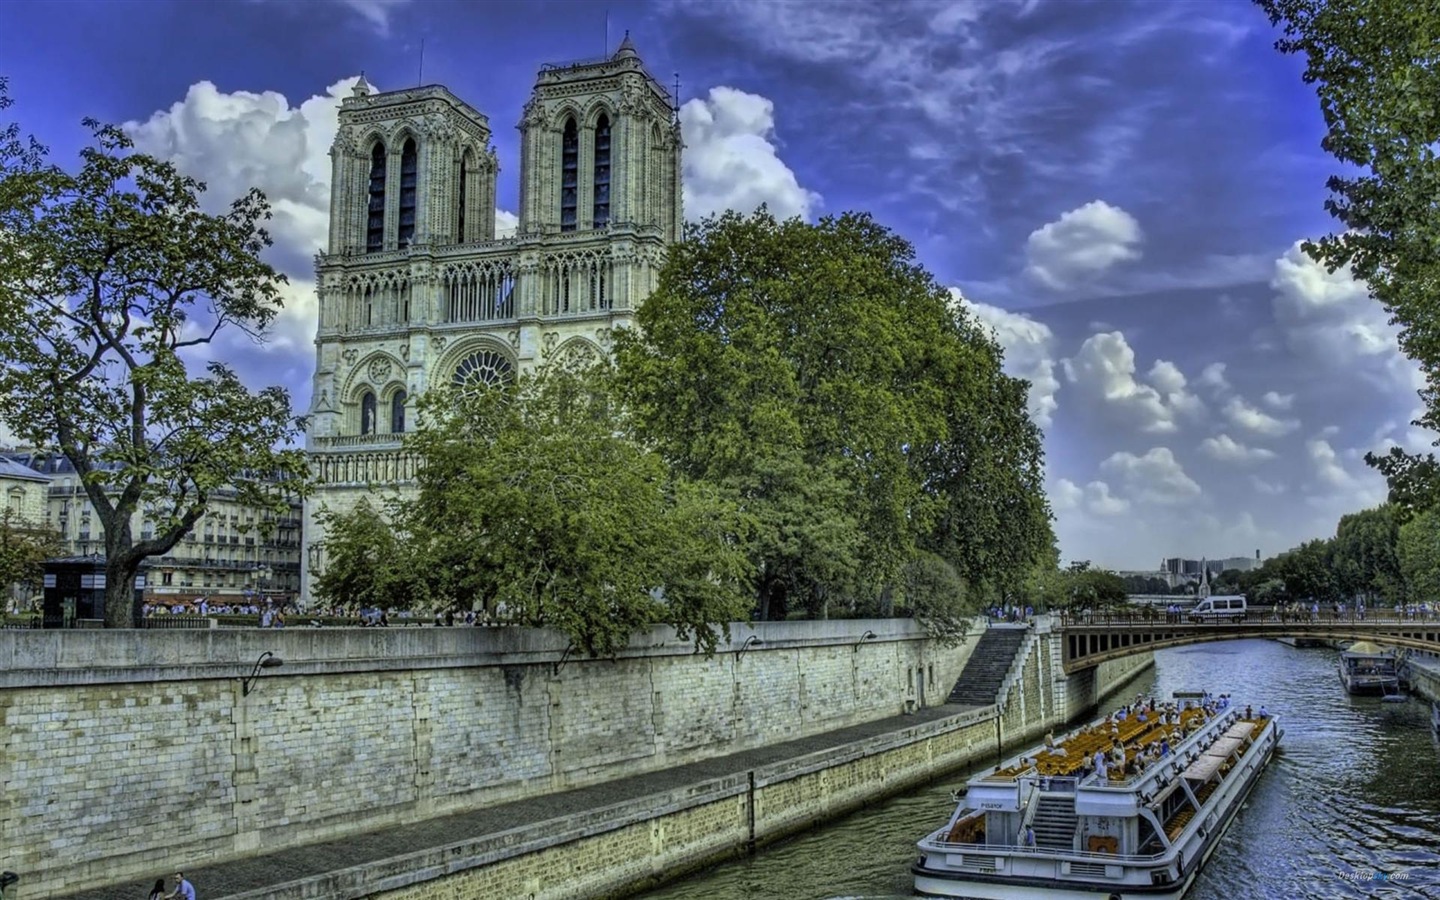 Notre Dame HD Wallpapers #10 - 1440x900